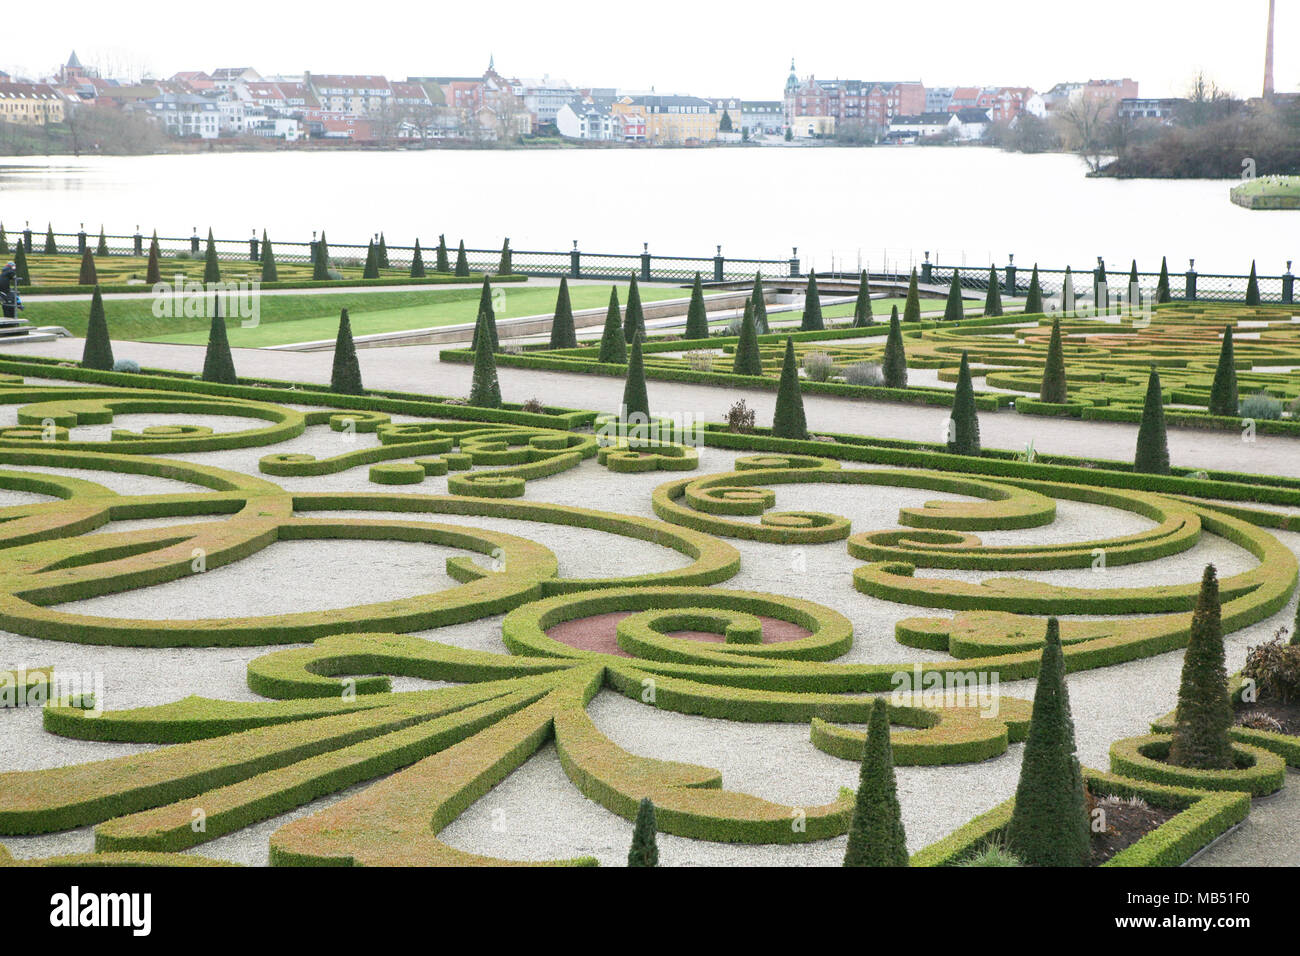 Formal garden at Hillerod castle and view of the city, Denmark Stock Photo